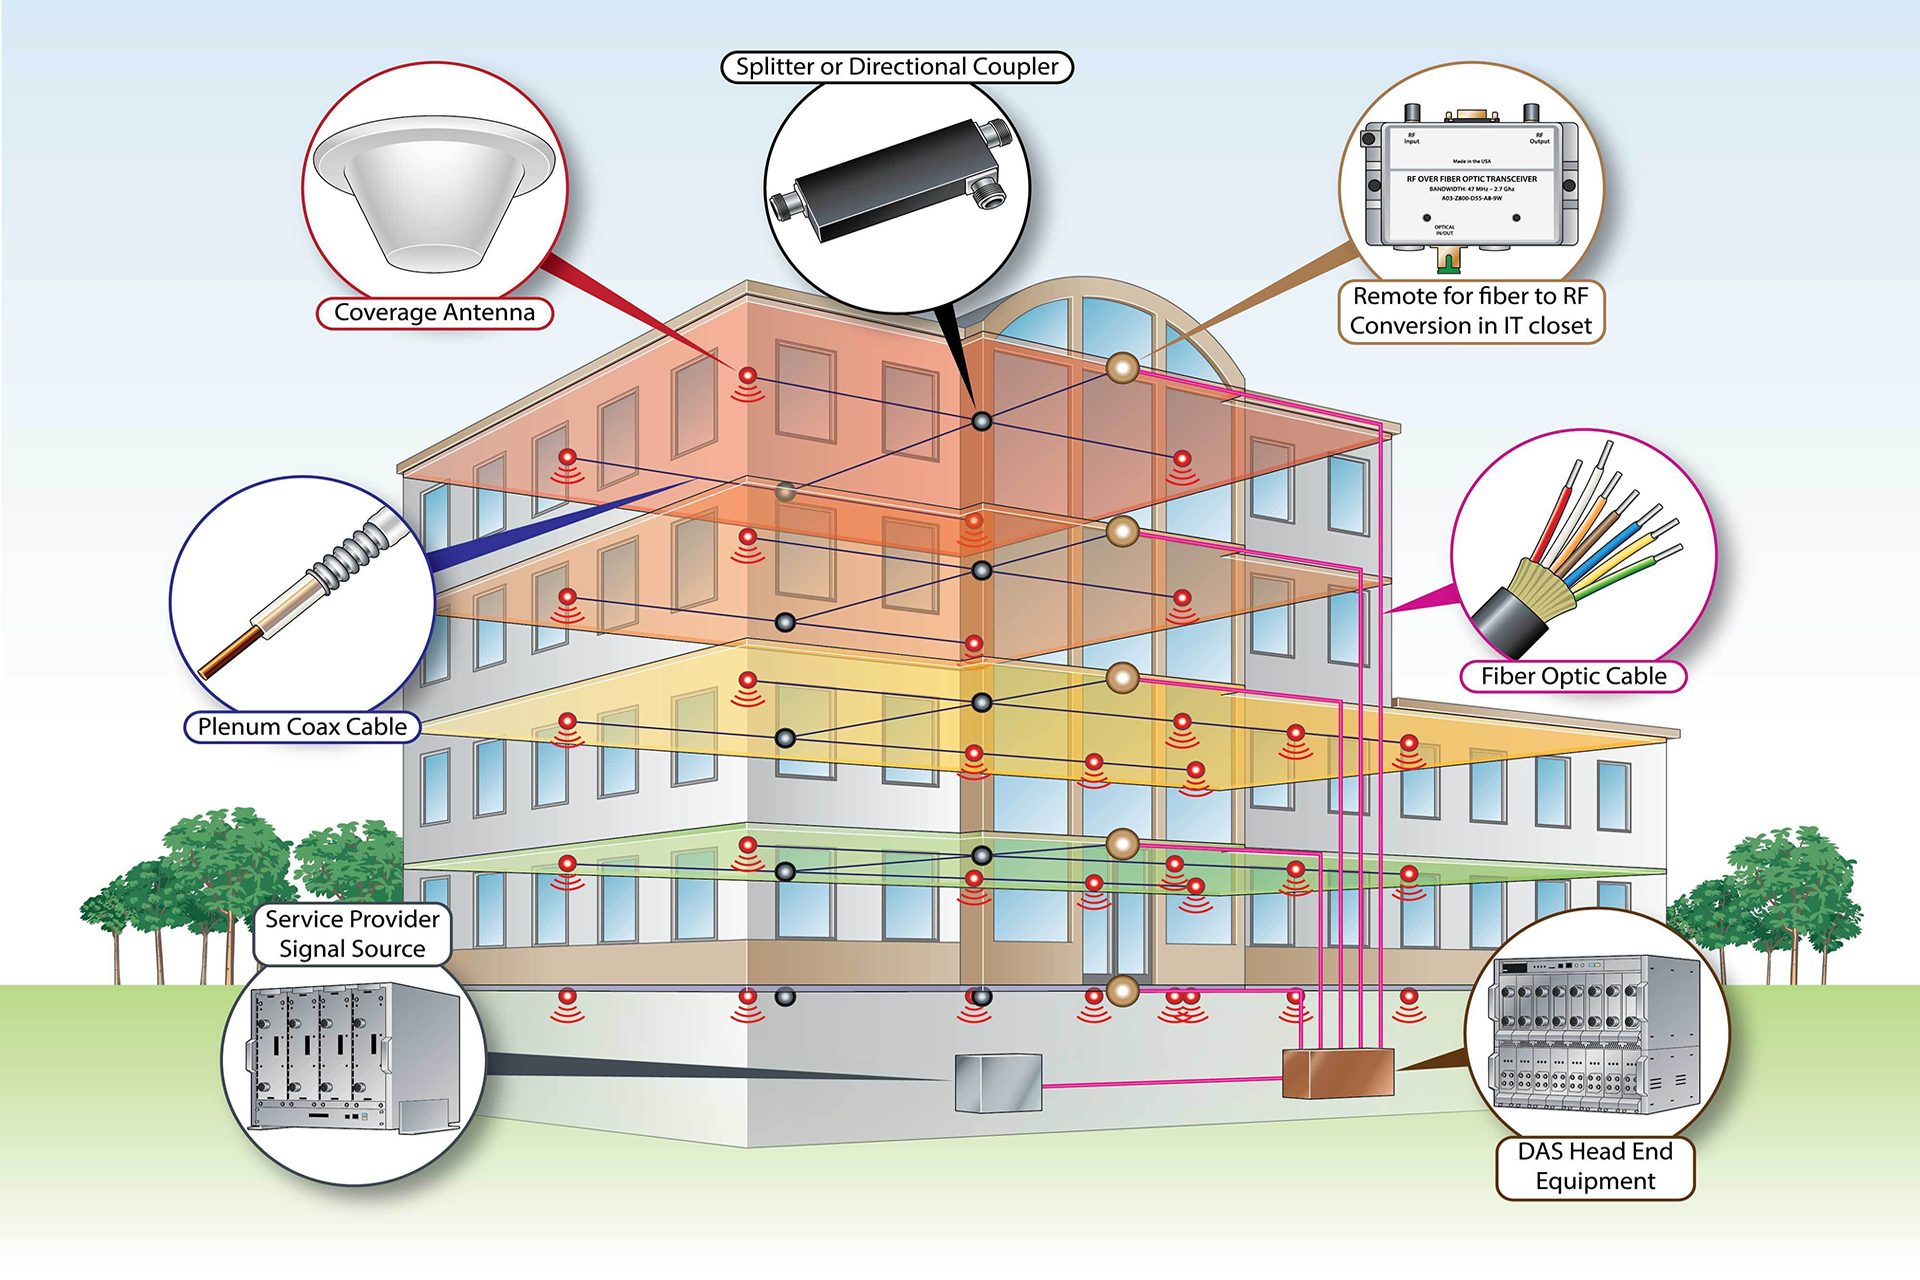 Above is an illustration of a large distribution system covering a building in which dozens of interior antennas are interconnected via fiber, coaxial and category cabling to provide even distribution of cellular signal.  Most such systems are scalable and can start from very modest to very extensive coverage.